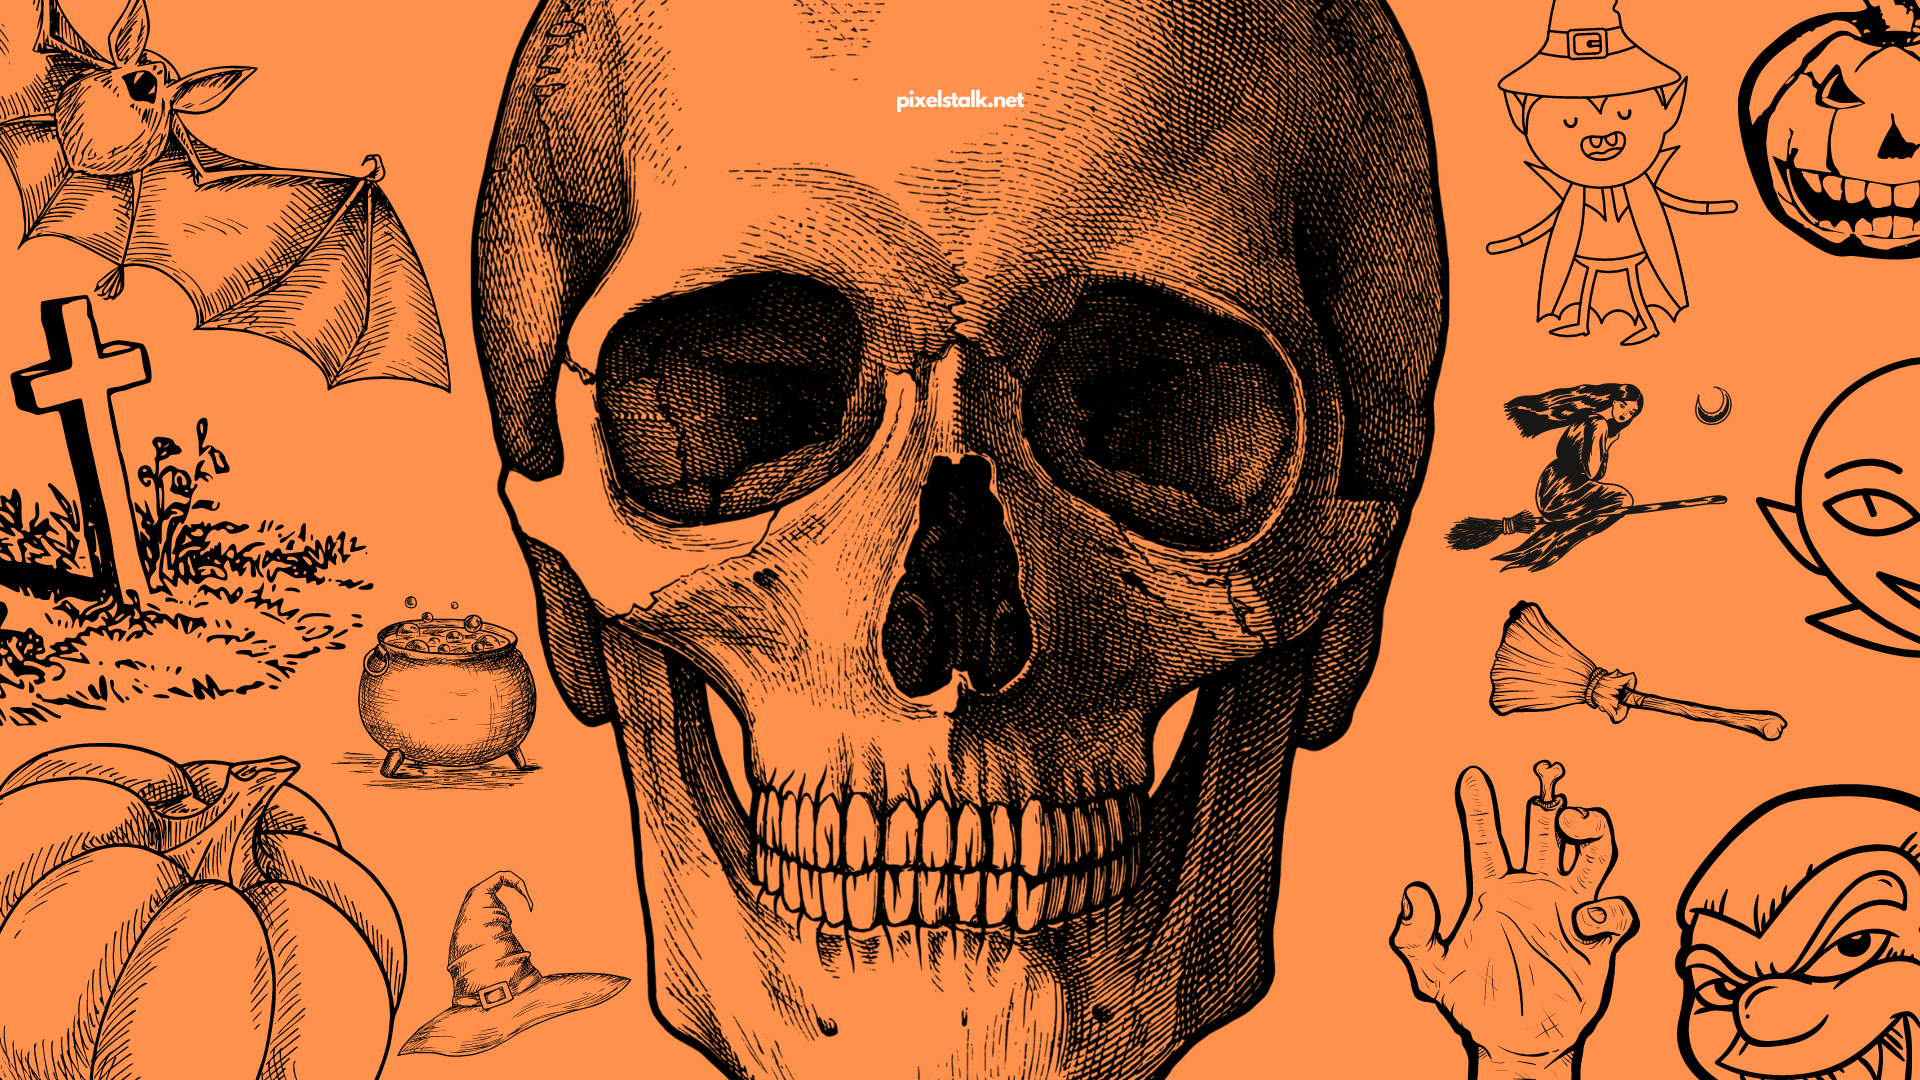 A skull surrounded by Halloween icons such as a pumpkin, witch, broom, and ghost - Halloween desktop